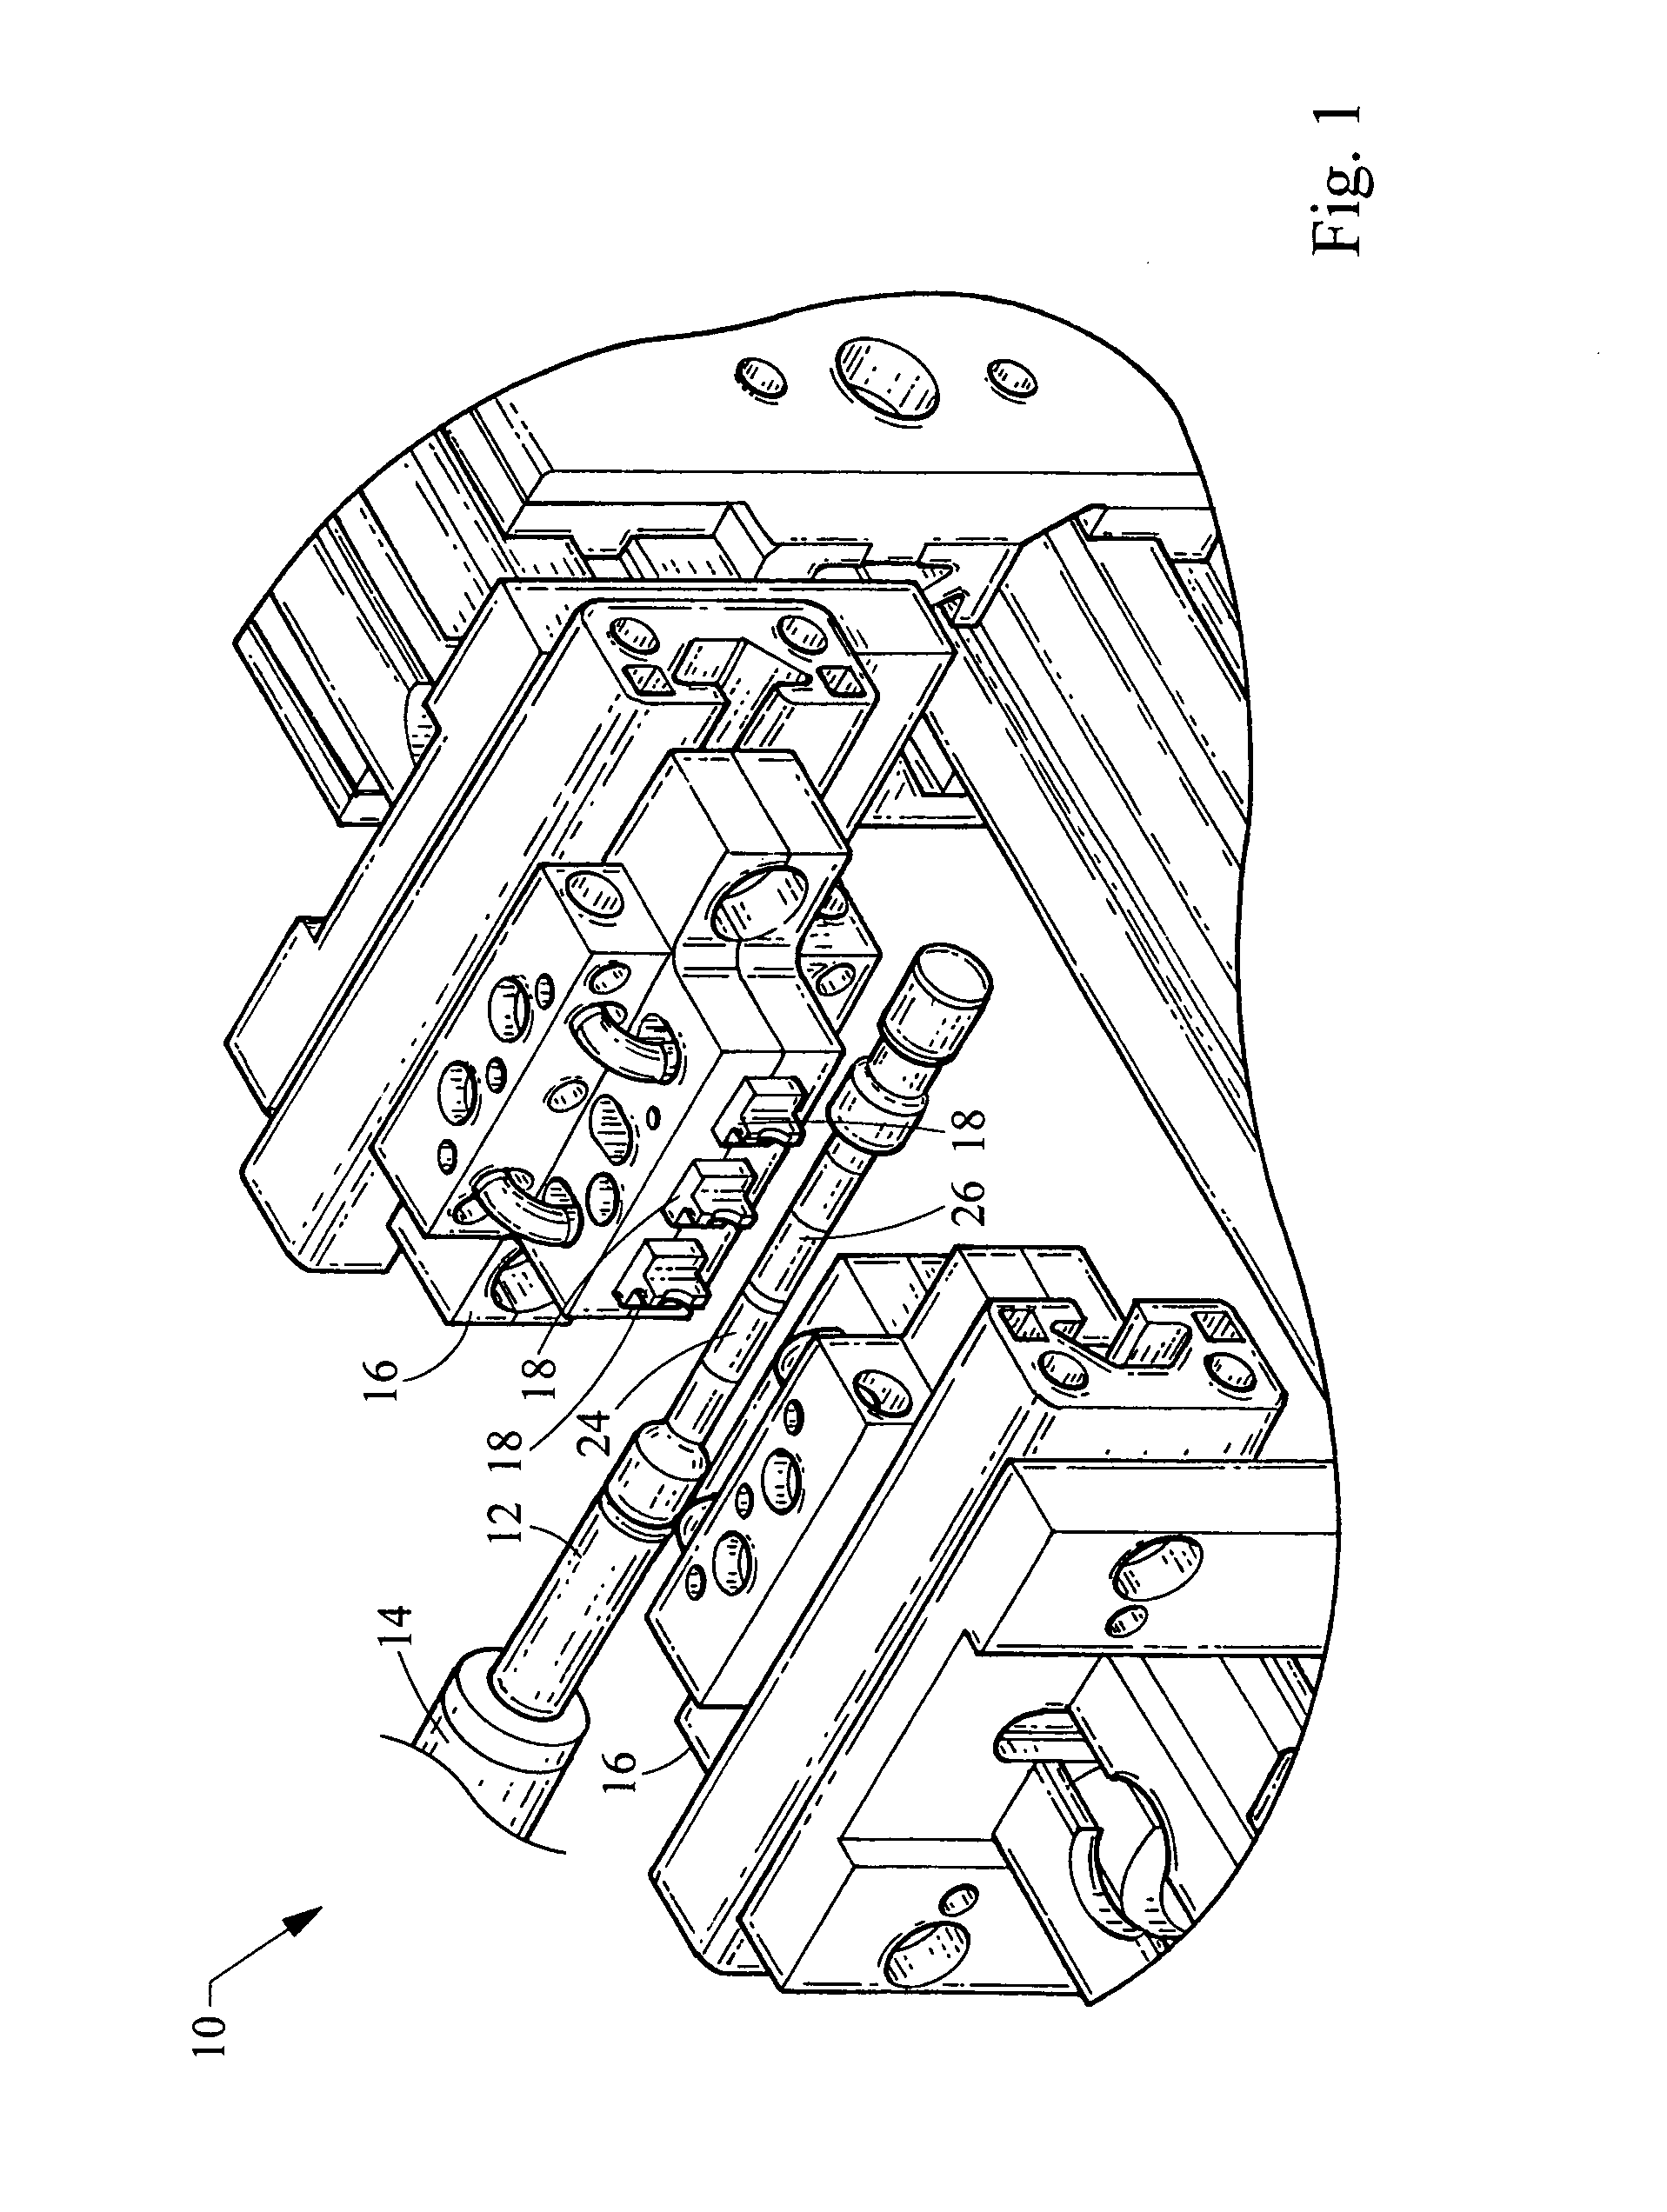 Process for circumferential magnetization of magnetoelastic shafts